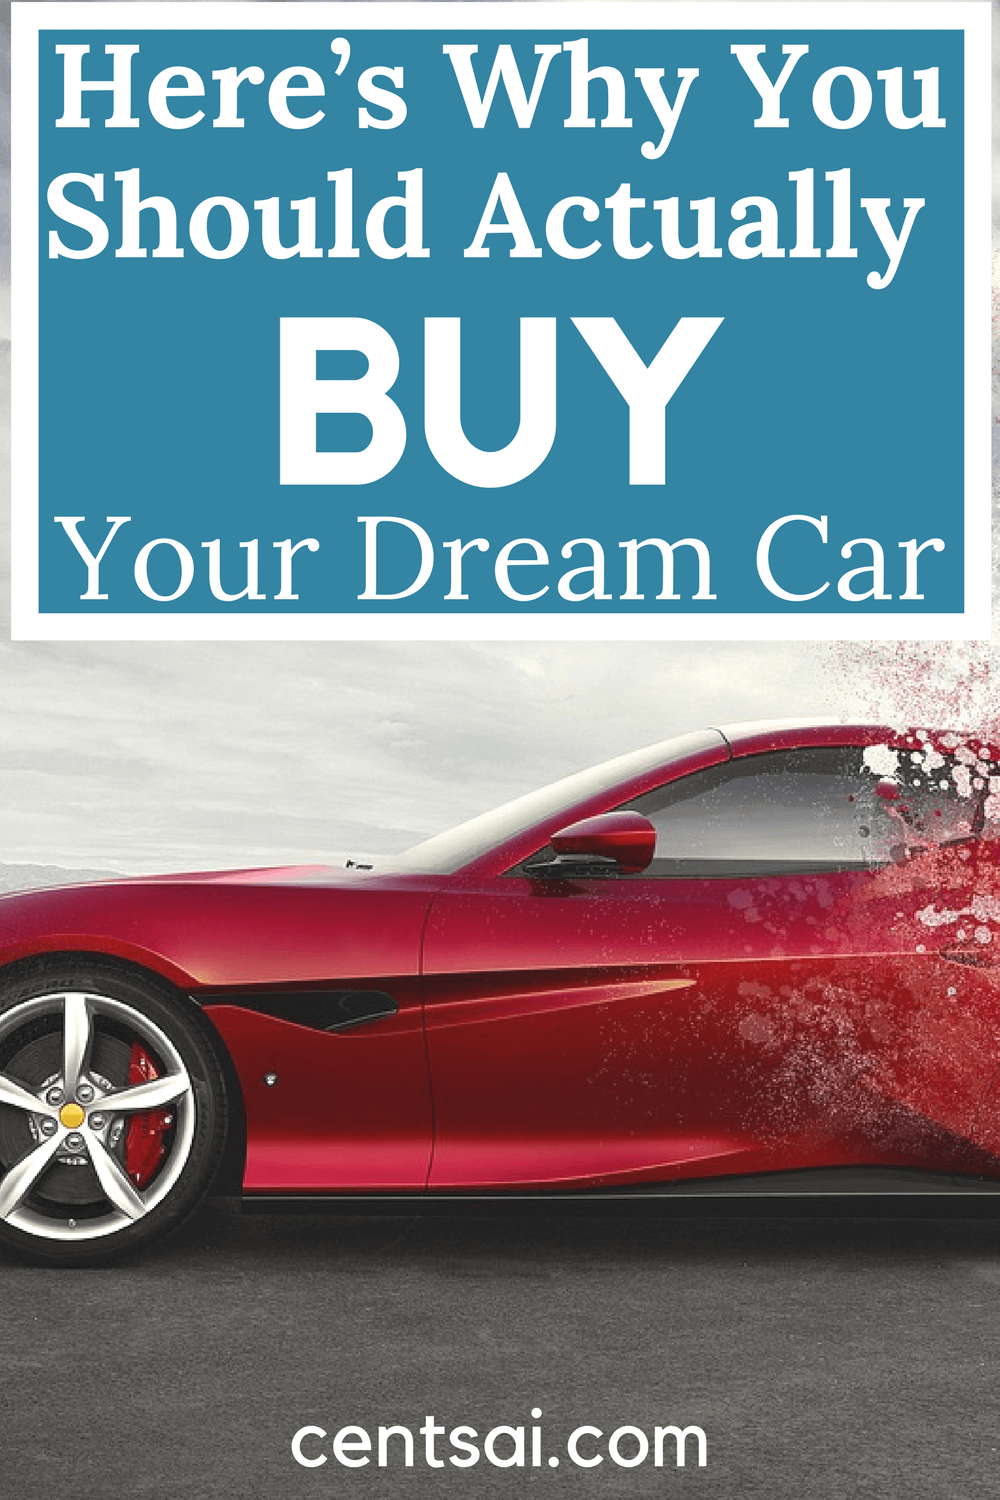 Here’s Why You Should Actually Buy Your Dream Car